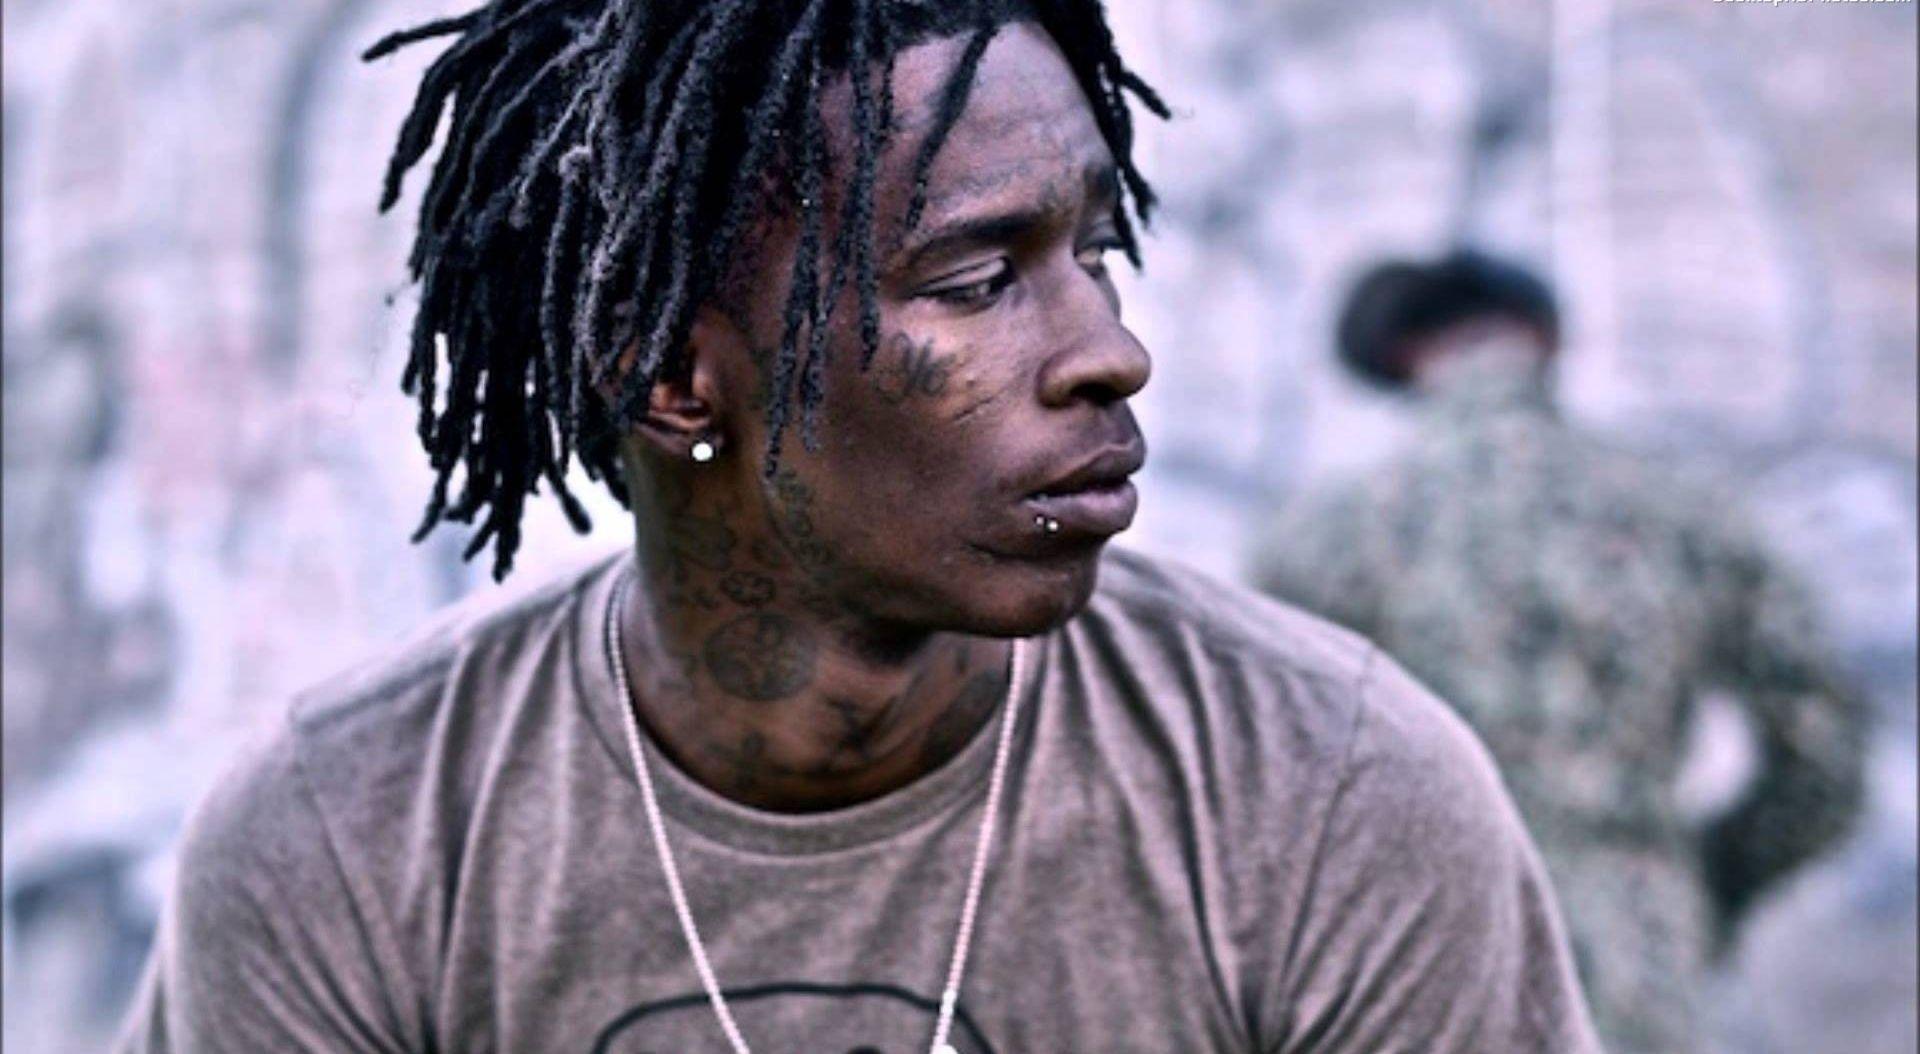 Young Thug Wallpaper Image Photo Picture Background